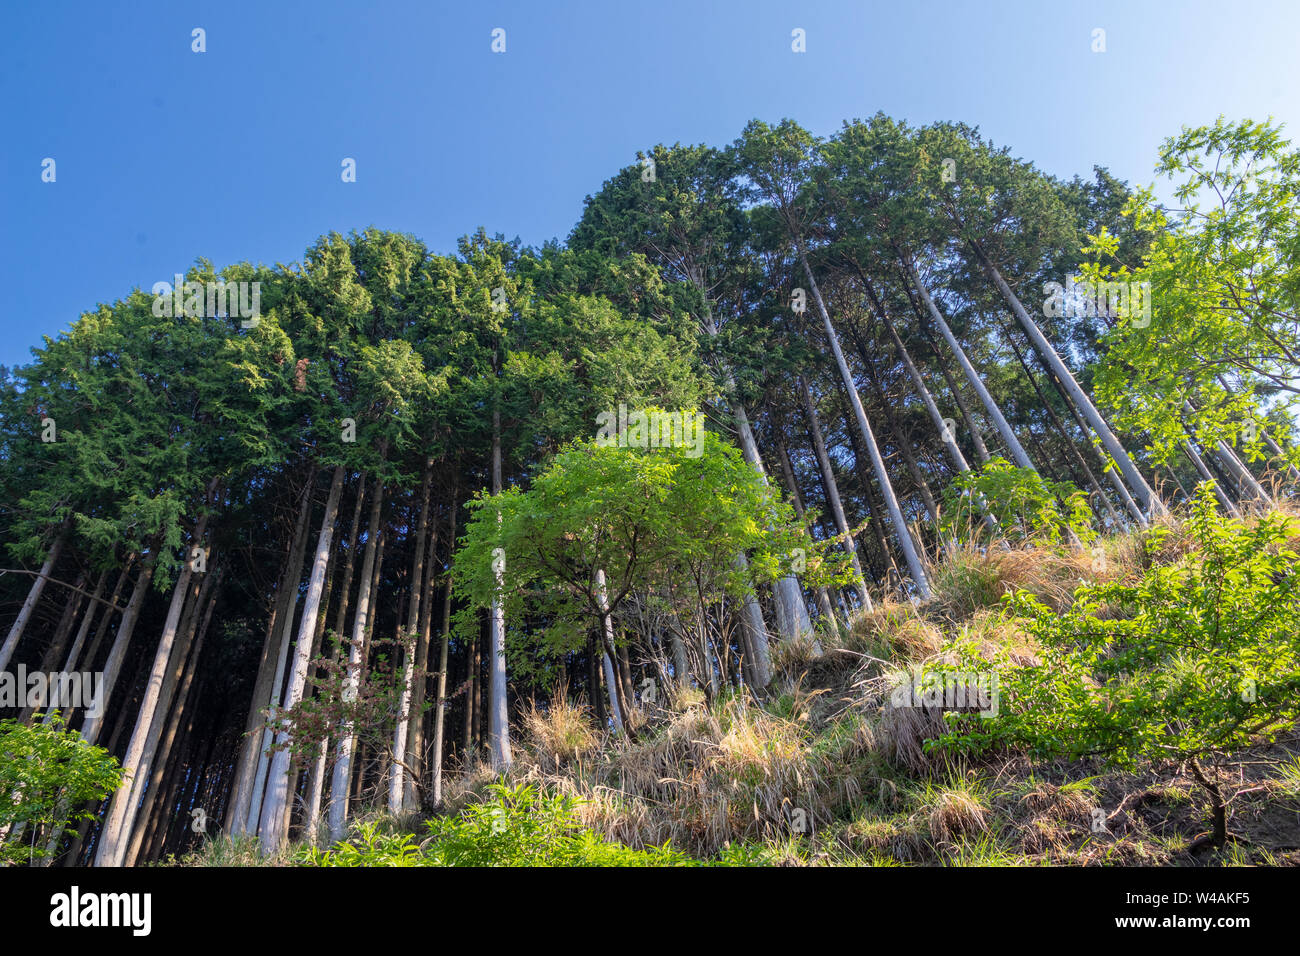 These very tall trees are typical of Japan Stock Photo